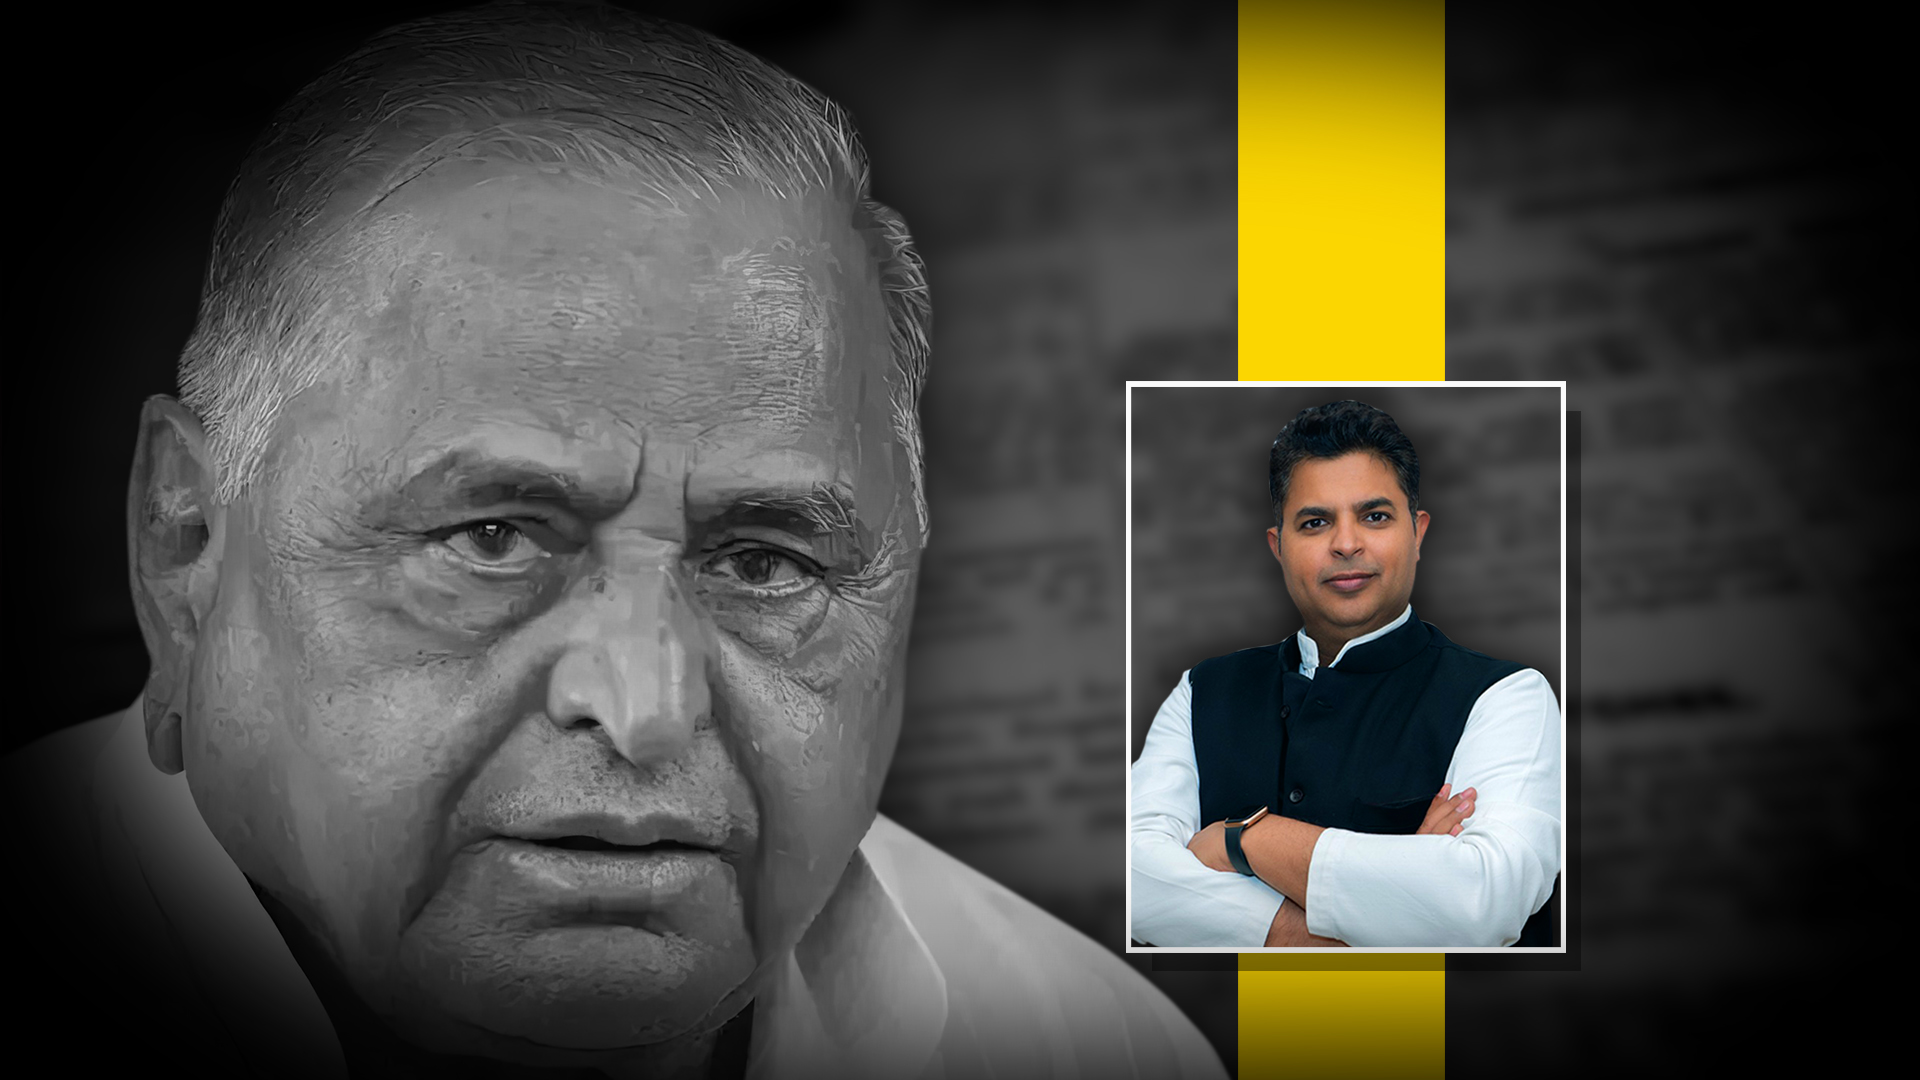 Mulayam Singh Yadav: A Socialist who Wrestled with Forces of Social Oppression